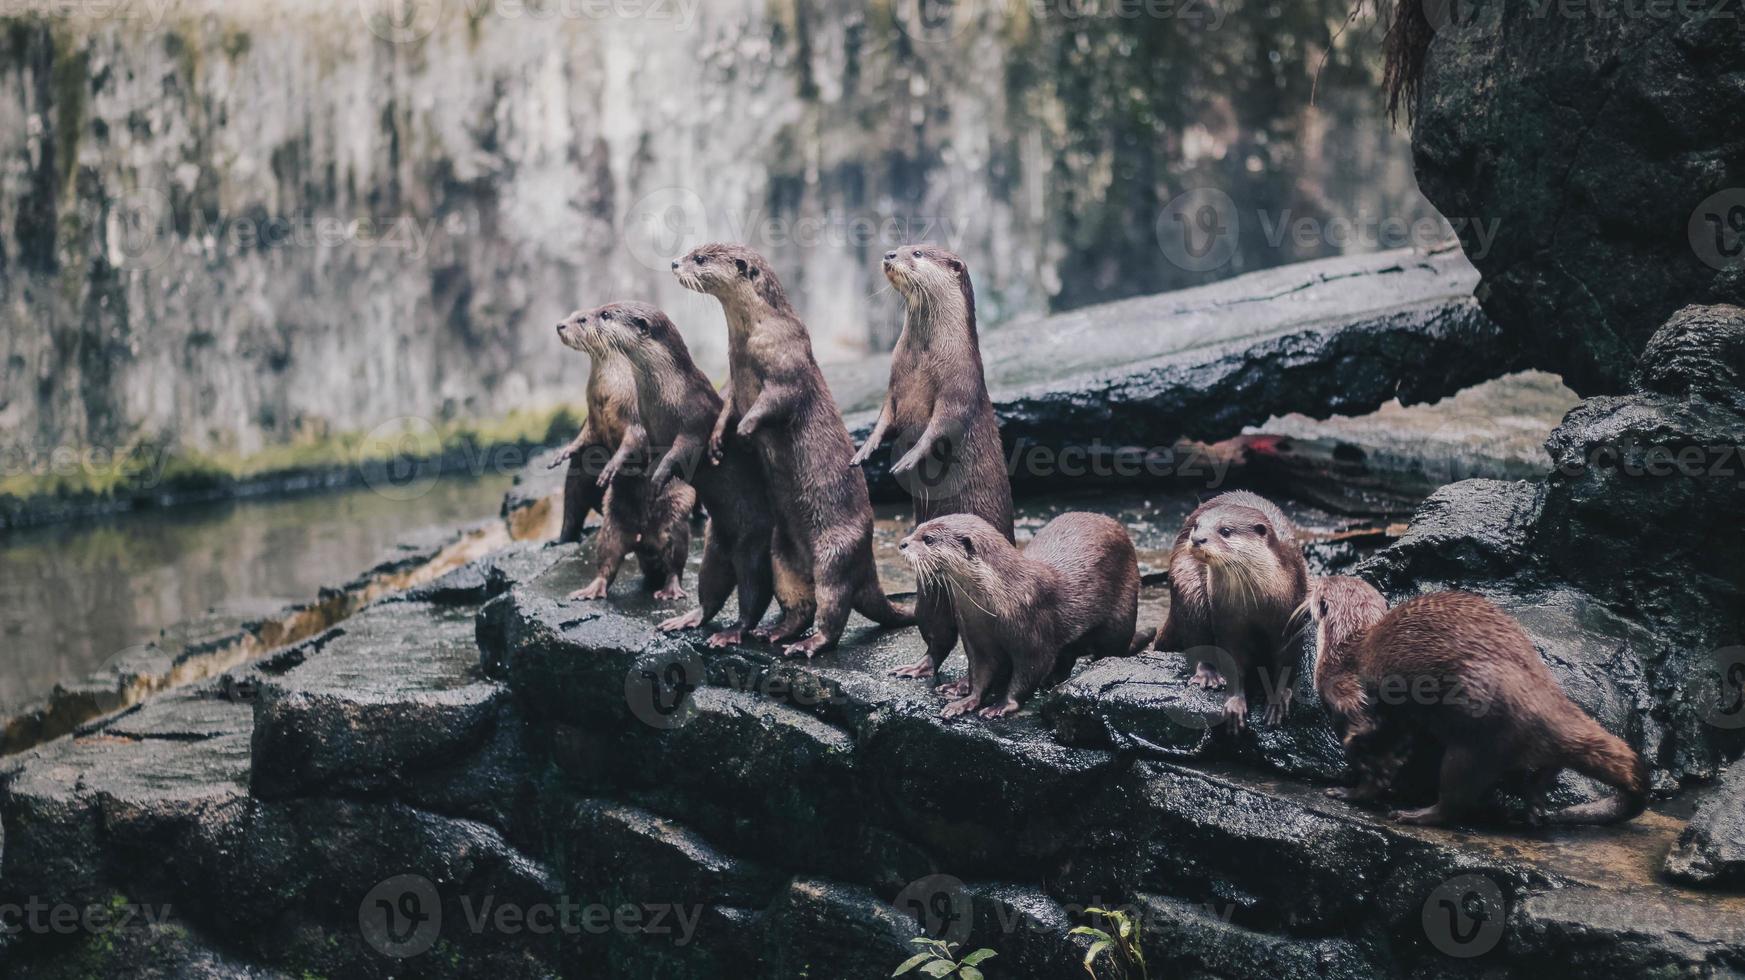 Oriental small clawed otter, also known as the Asian small-clawed otter standing together with their group. photo